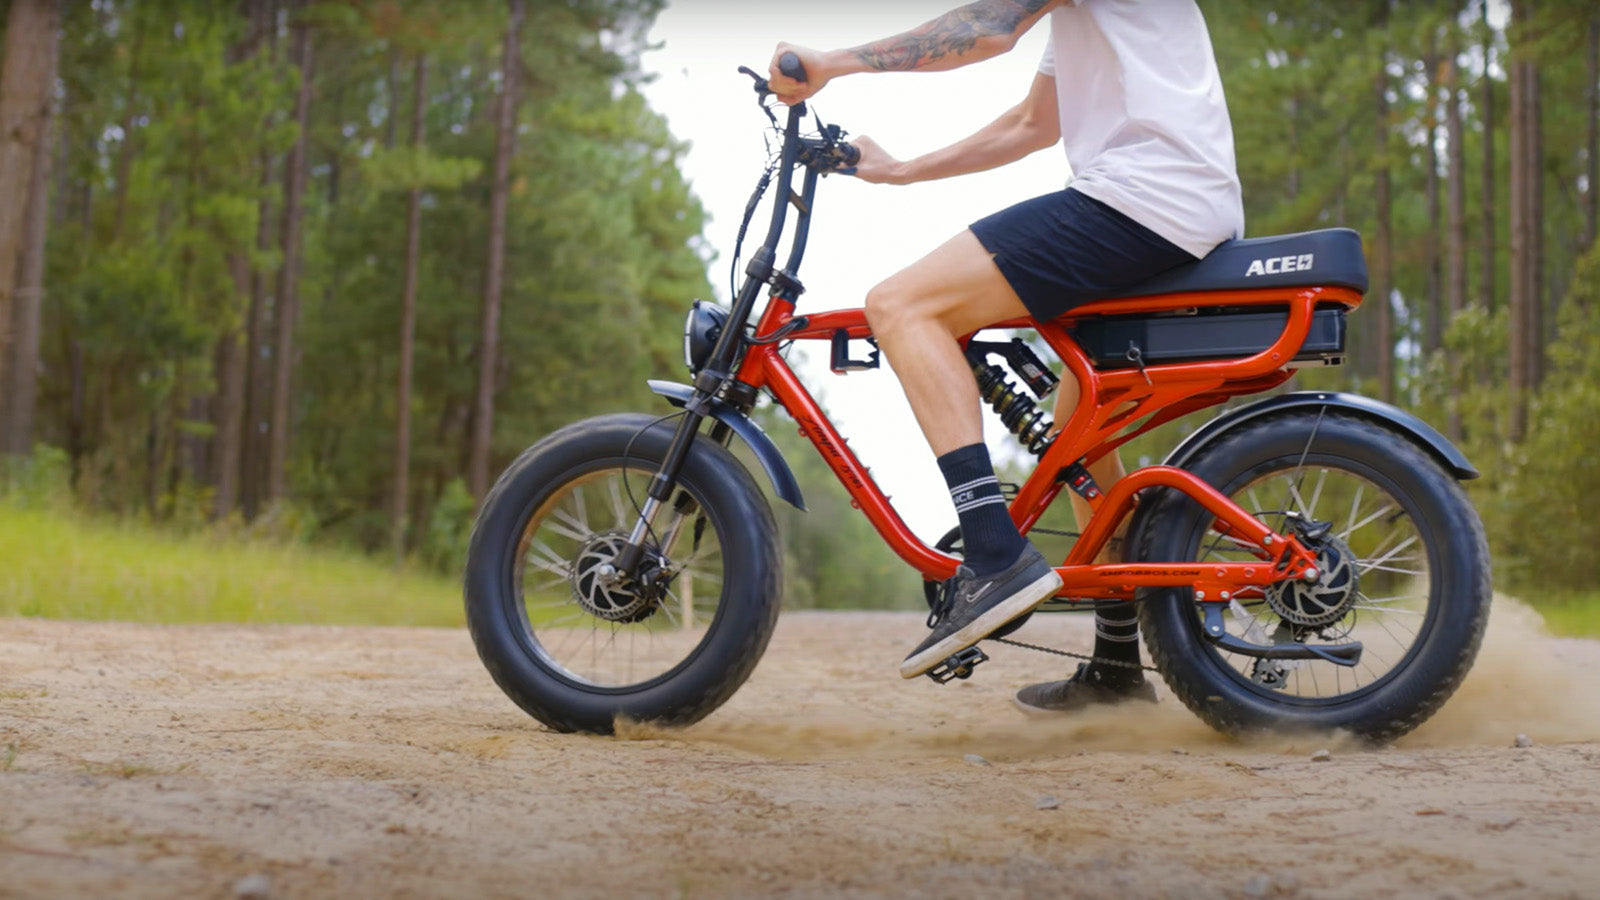 Freedom Machine Byron Bay Ace-X Demon review suspension